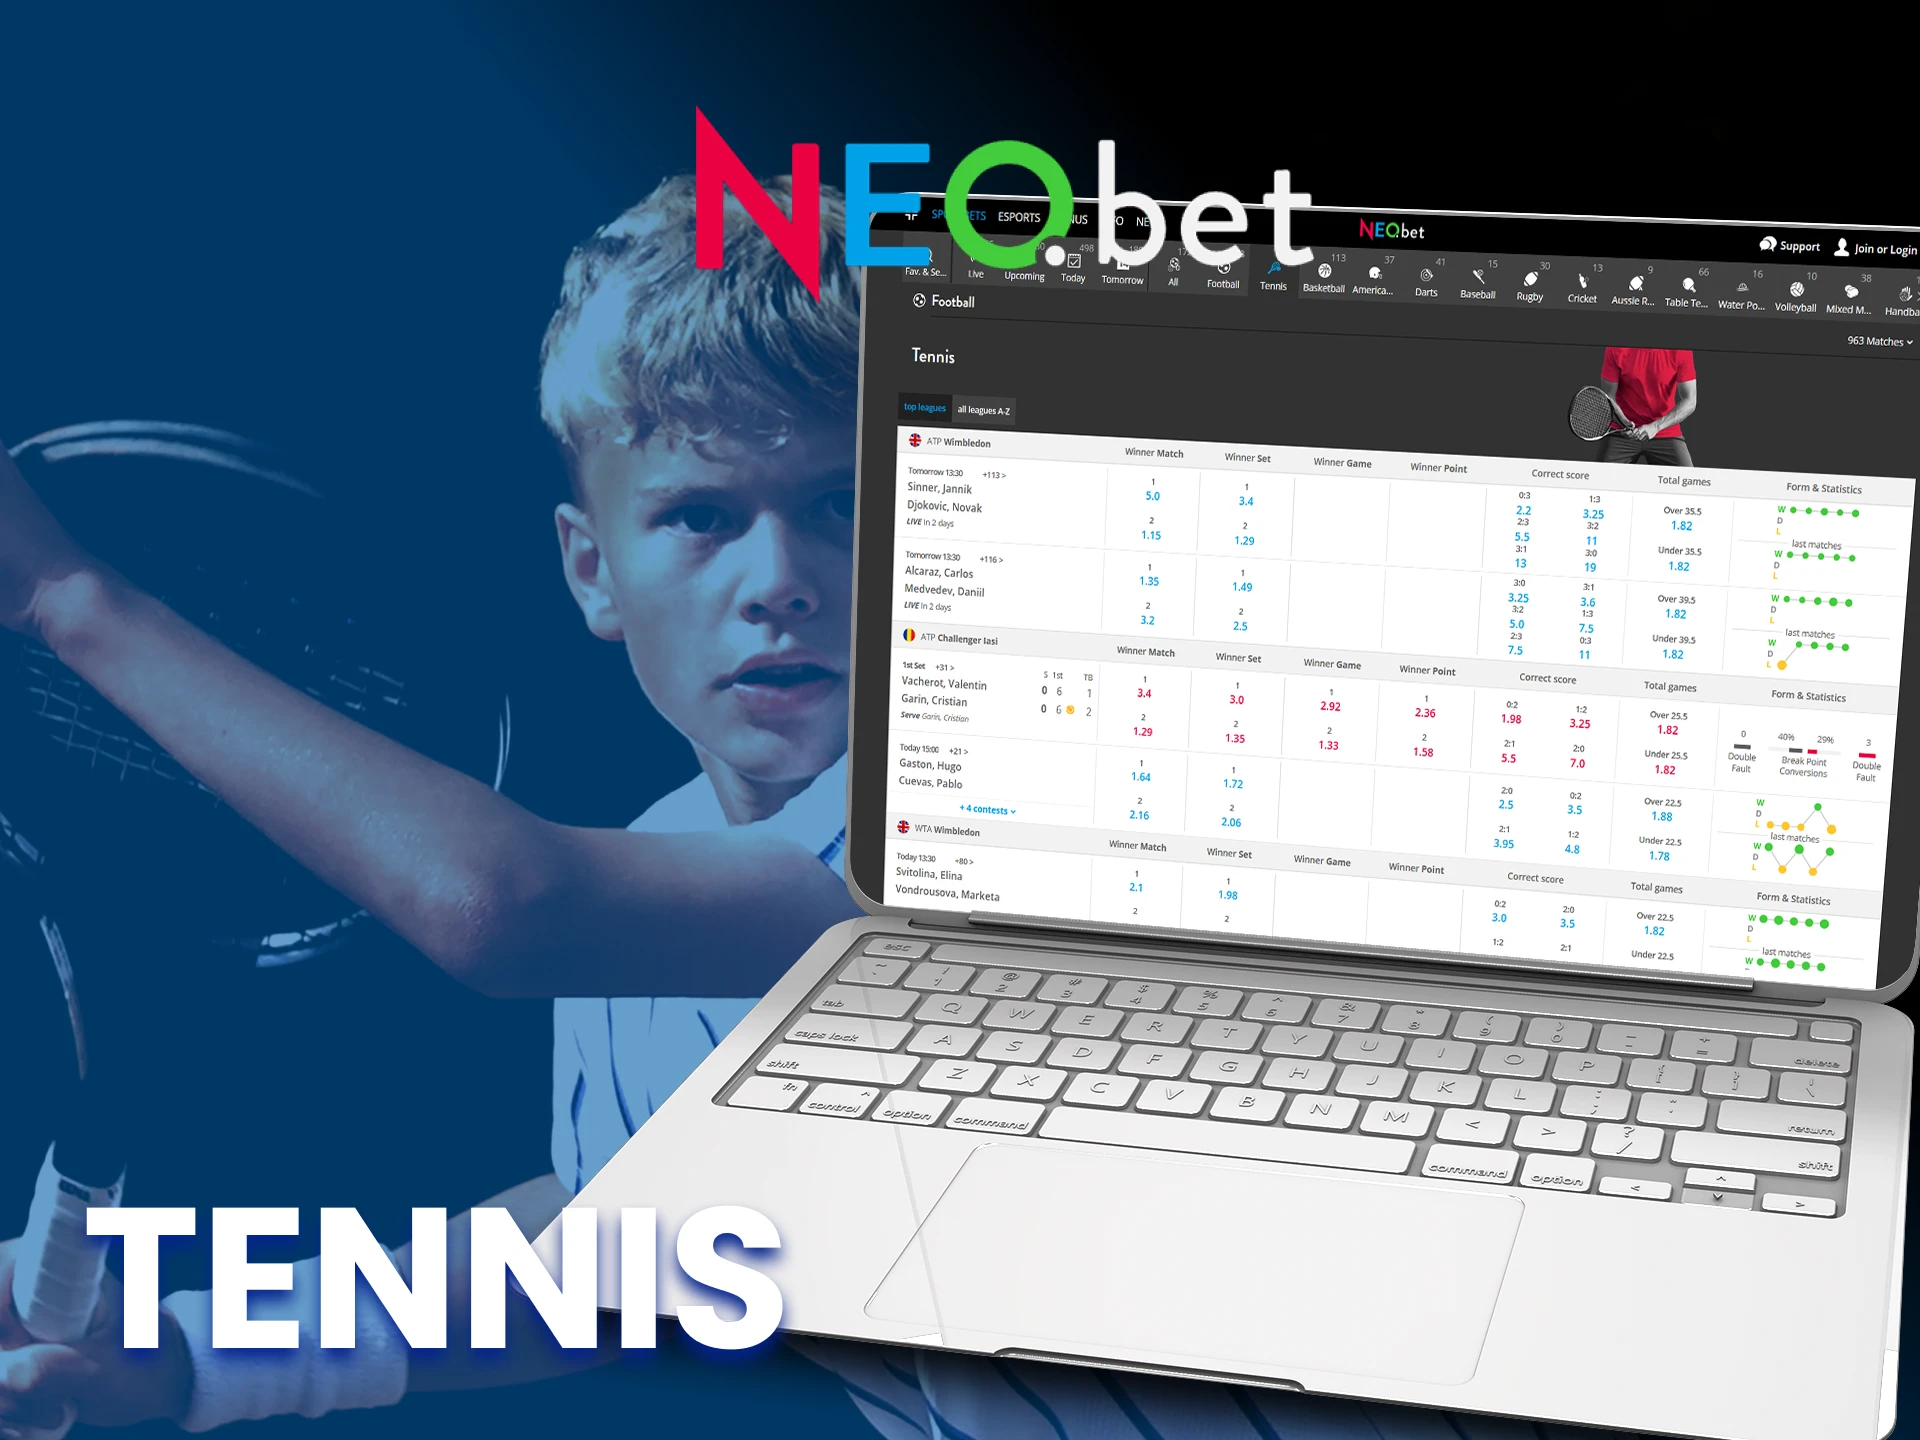 With NEO.bet, make your winning tennis bet.